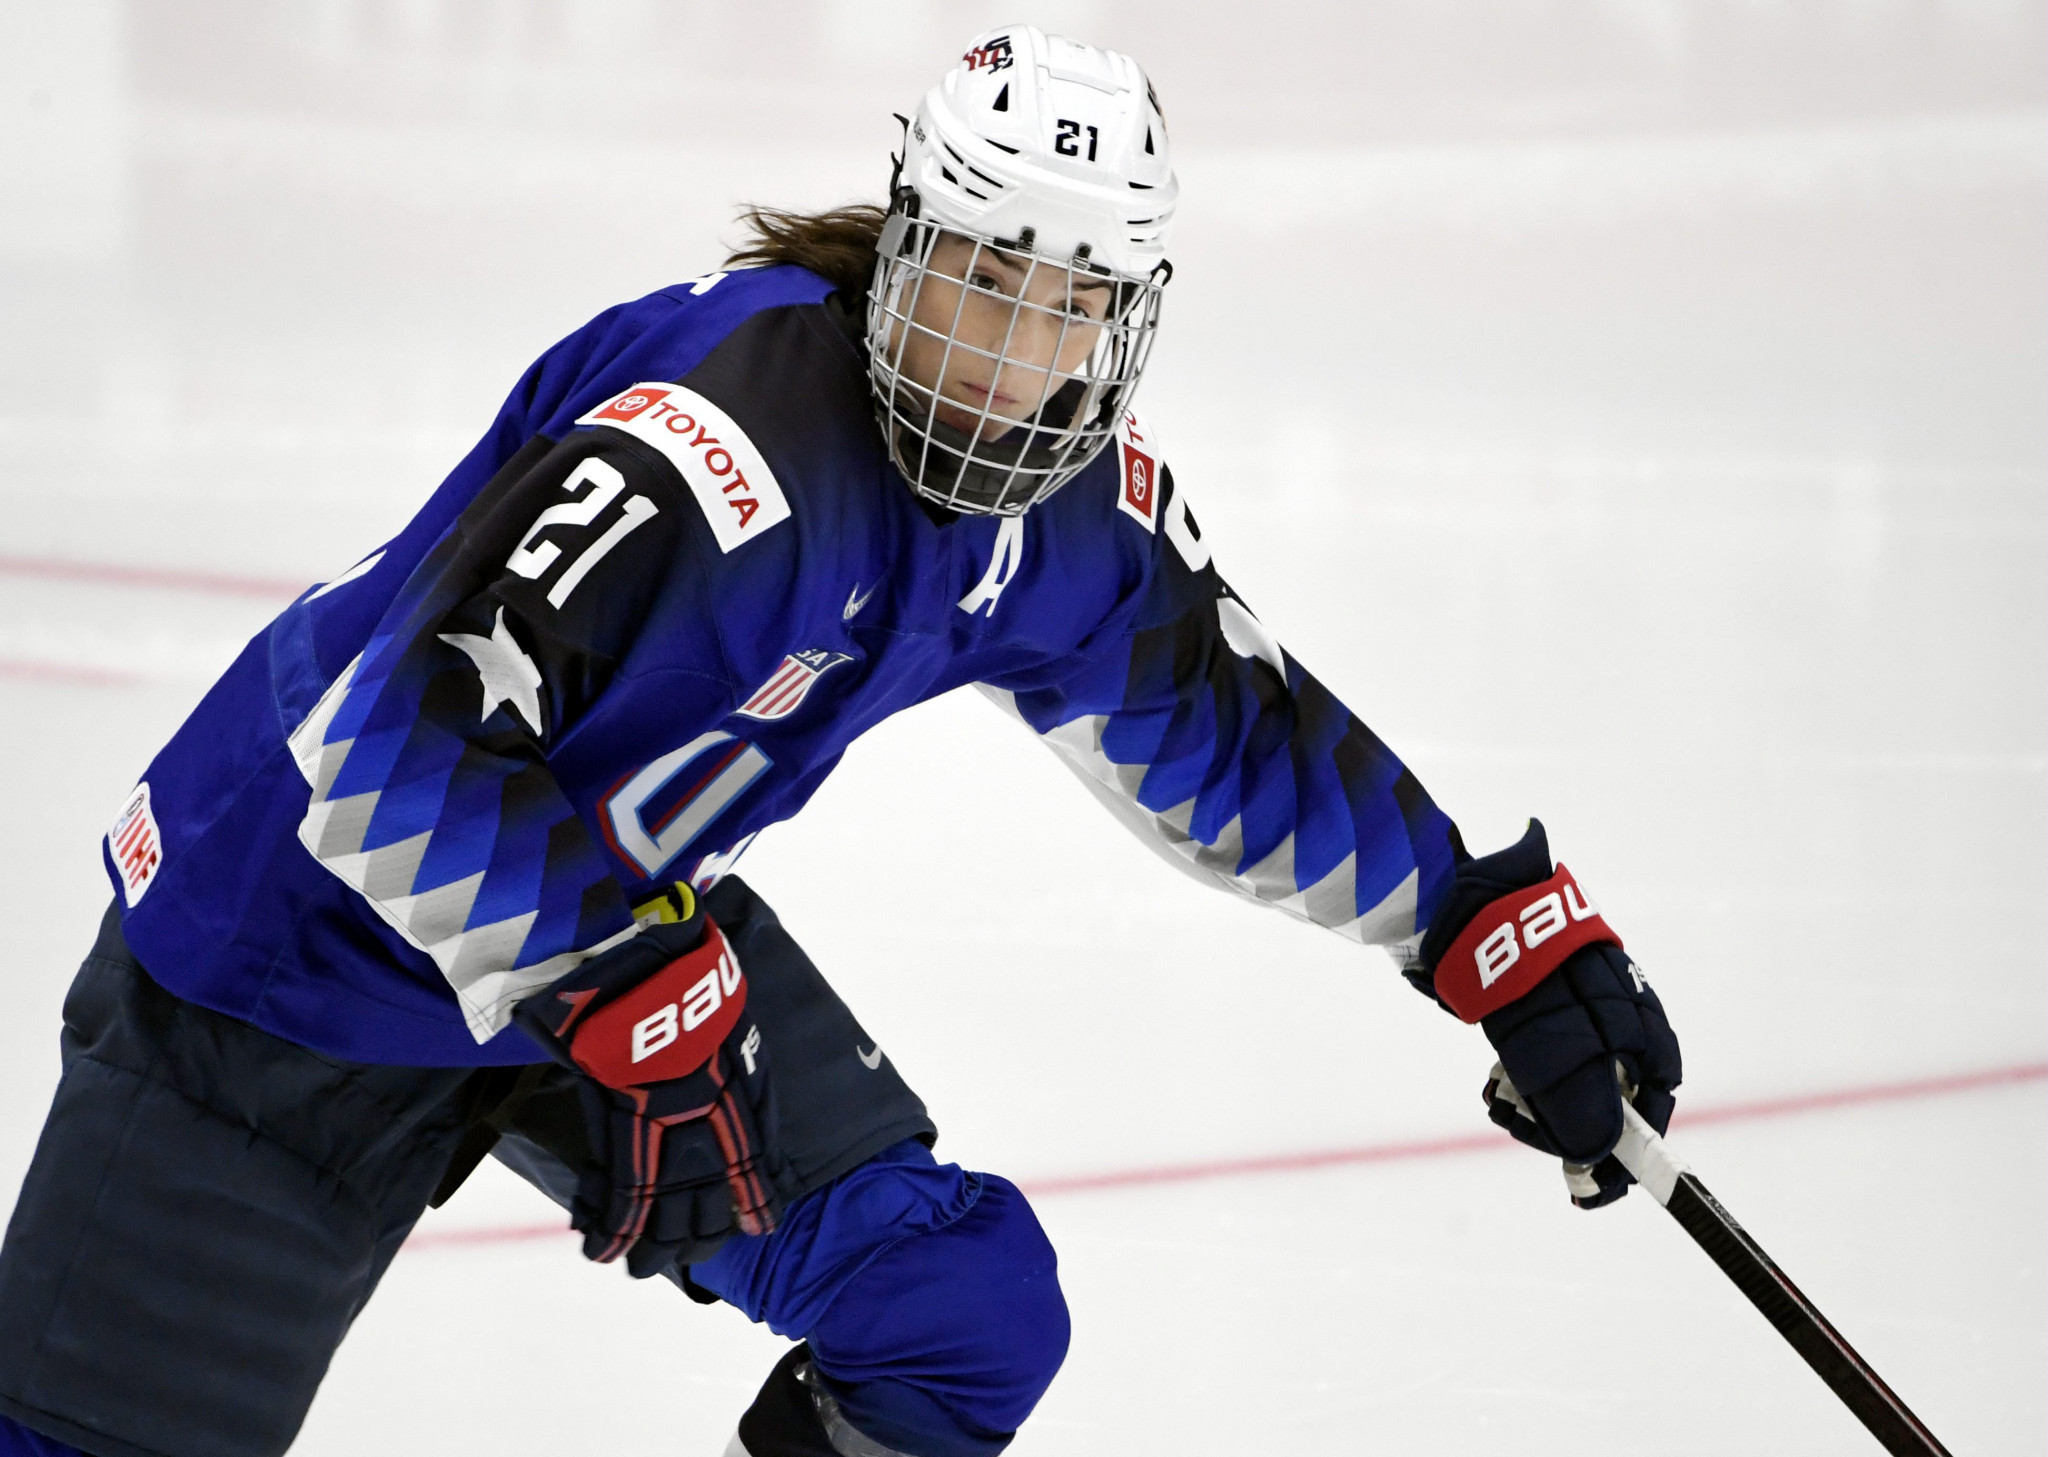 Female ice hockey stars refuse to play in North American league until conditions improve